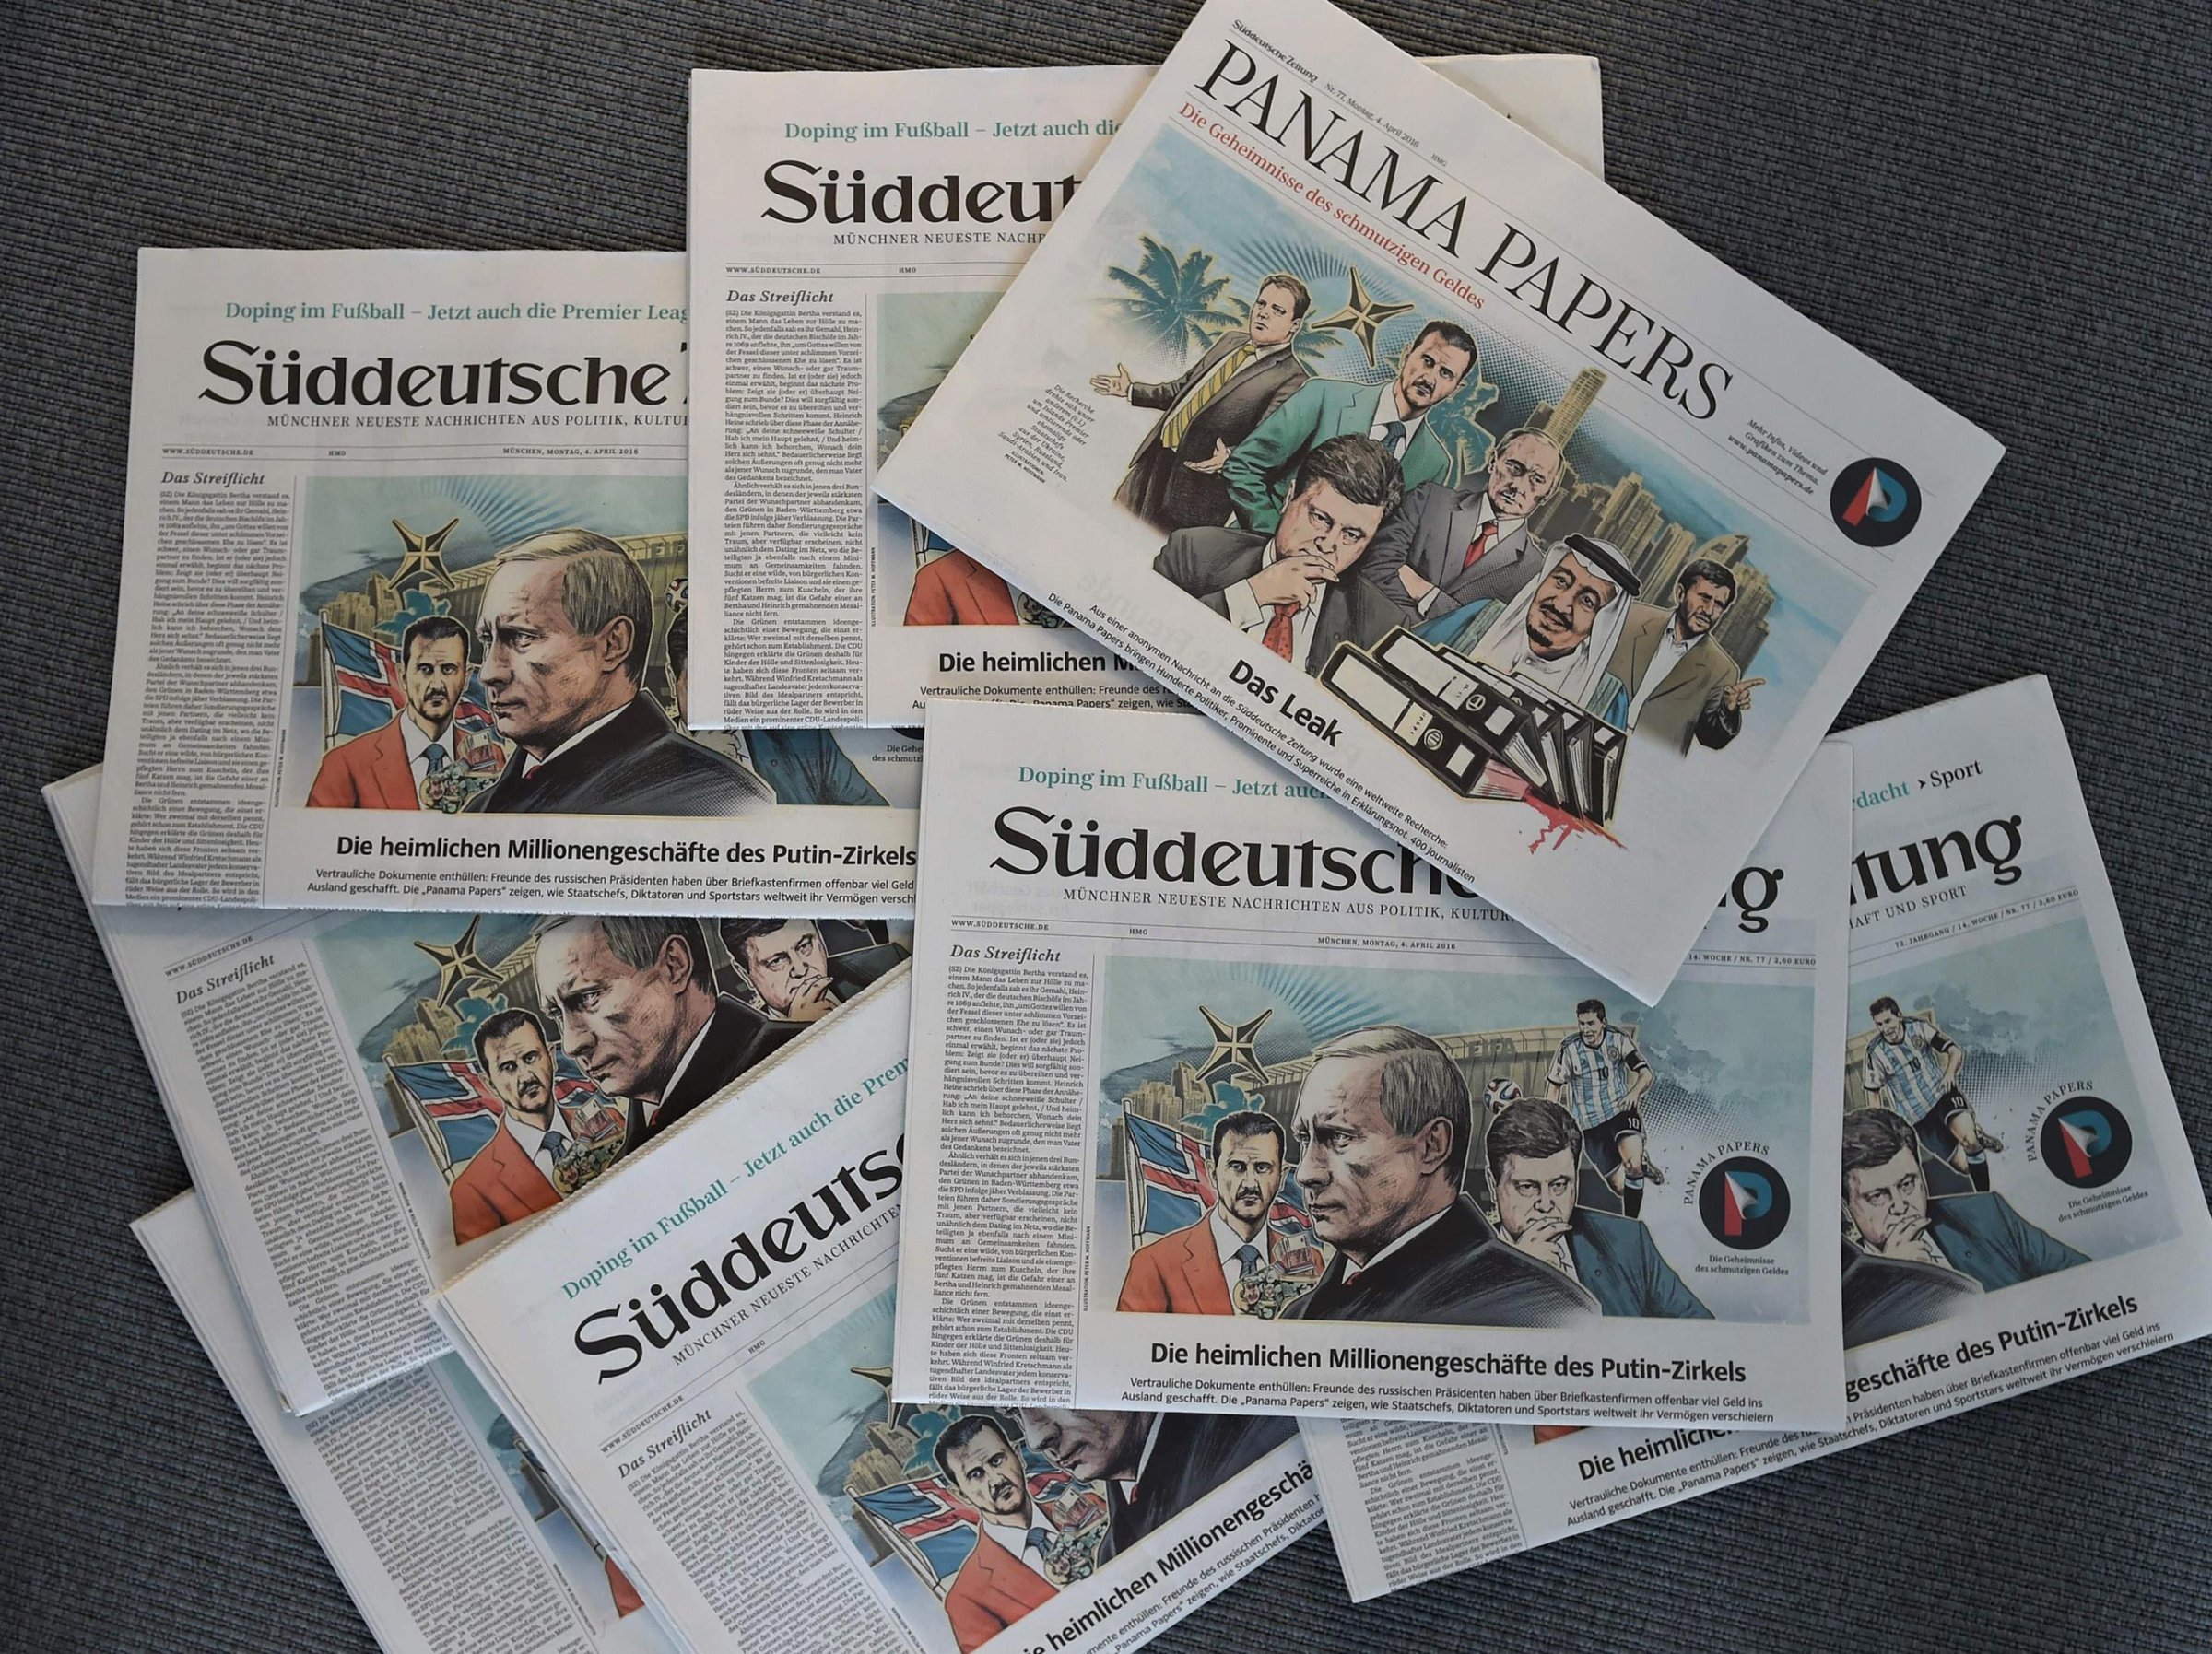 Issues of the German daily Sueddeutsche Zeitung, featuring illustrations of leaders including Russian President Vladimir Putin by Peter M Hoffmann, are seen at the newspaper's office in Munich, Germany, April 7, 2016.